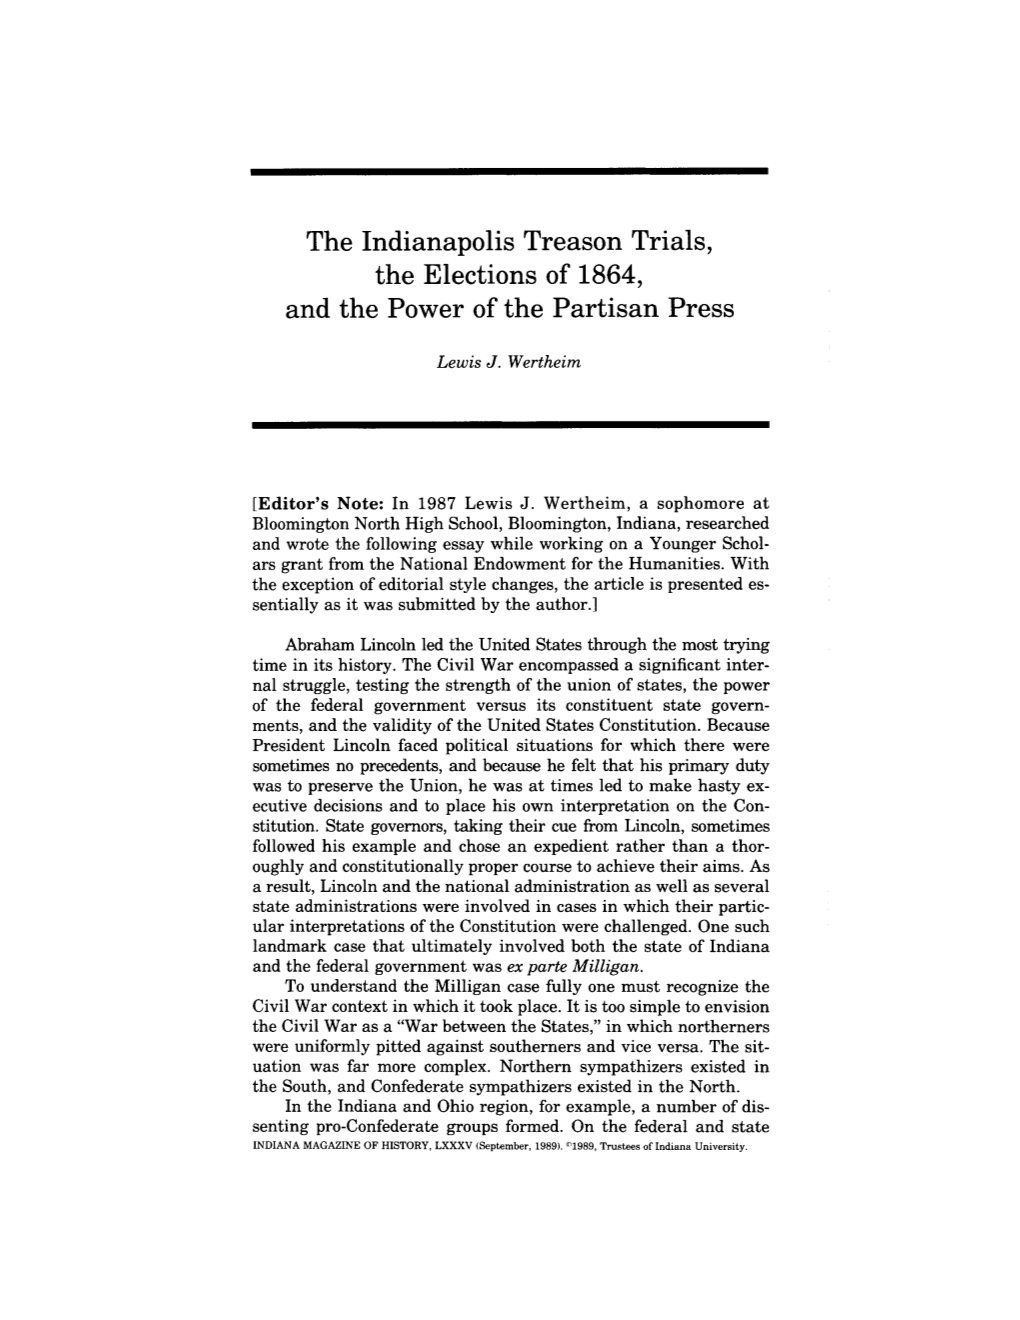 The Indianapolis Treason Trials, the Elections of 1864, and the Power of the Partisan Press